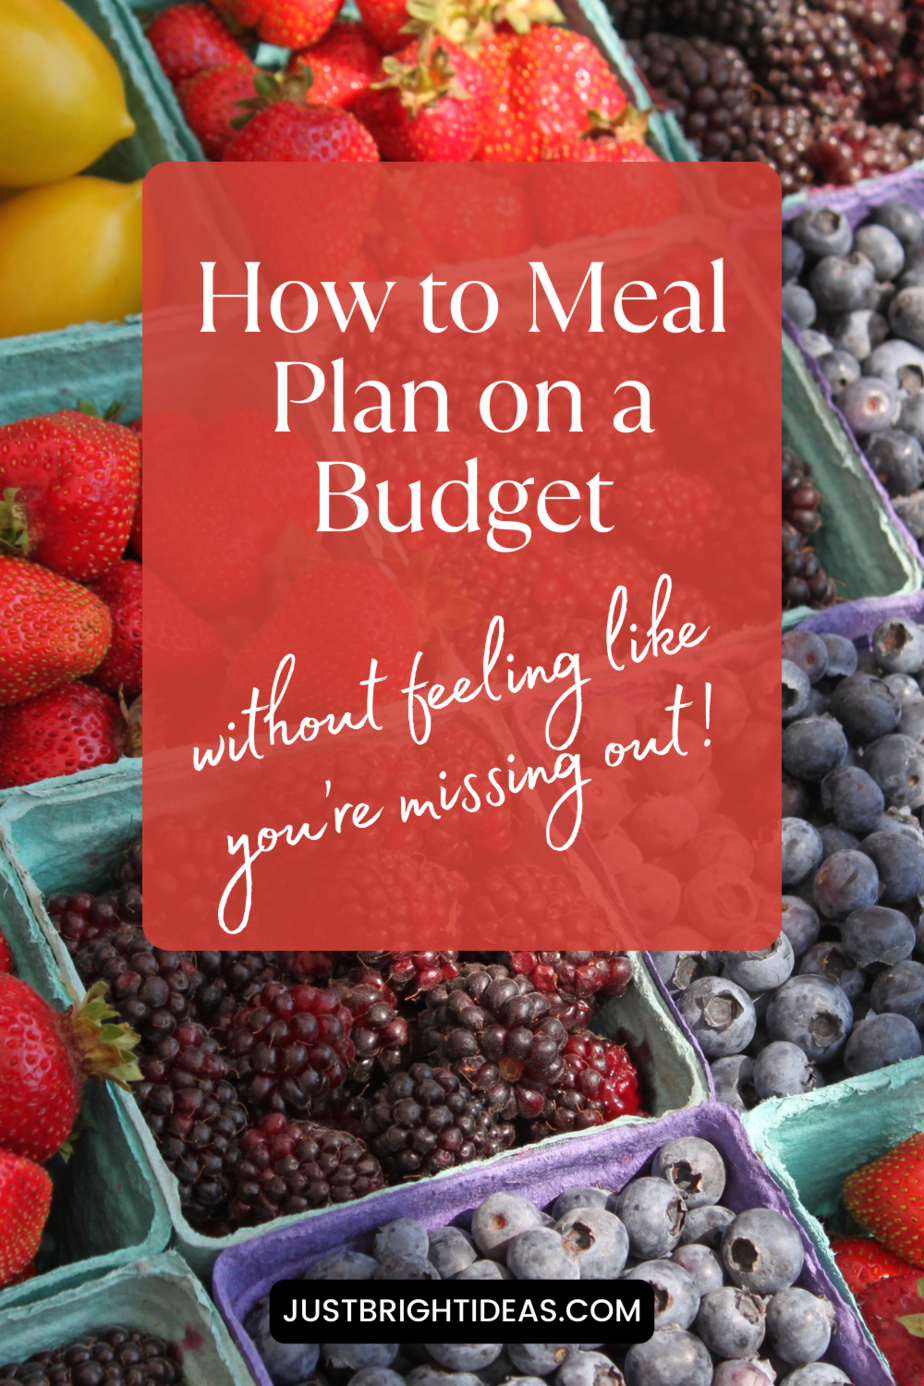 🍽️ Budget-friendly meal planning, coming in hot! 🔥 Get ready to conquer the kitchen without breaking the bank with our guide to meal planning on a budget! 💸✨ From pantry raids to freezer feasts, we've got all the tips and tricks you need to eat well without spending a fortune. Let's cook up some delicious savings together! 💪🌟 #BudgetFriendlyEats #MealPlanningMagic #SavingsOnTheMenu